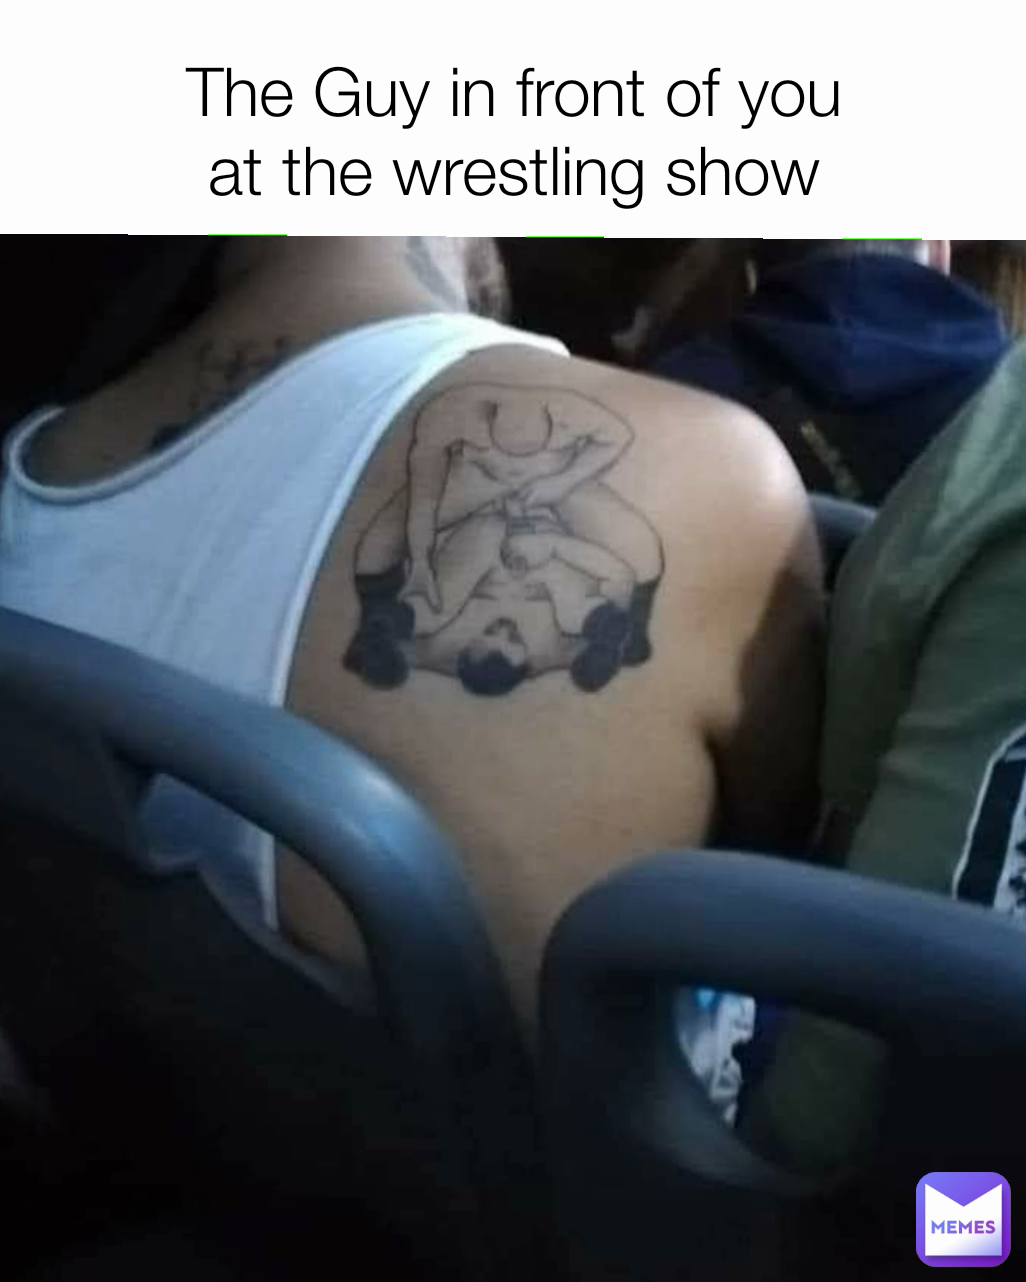 The Guy in front of you
at the wrestling show